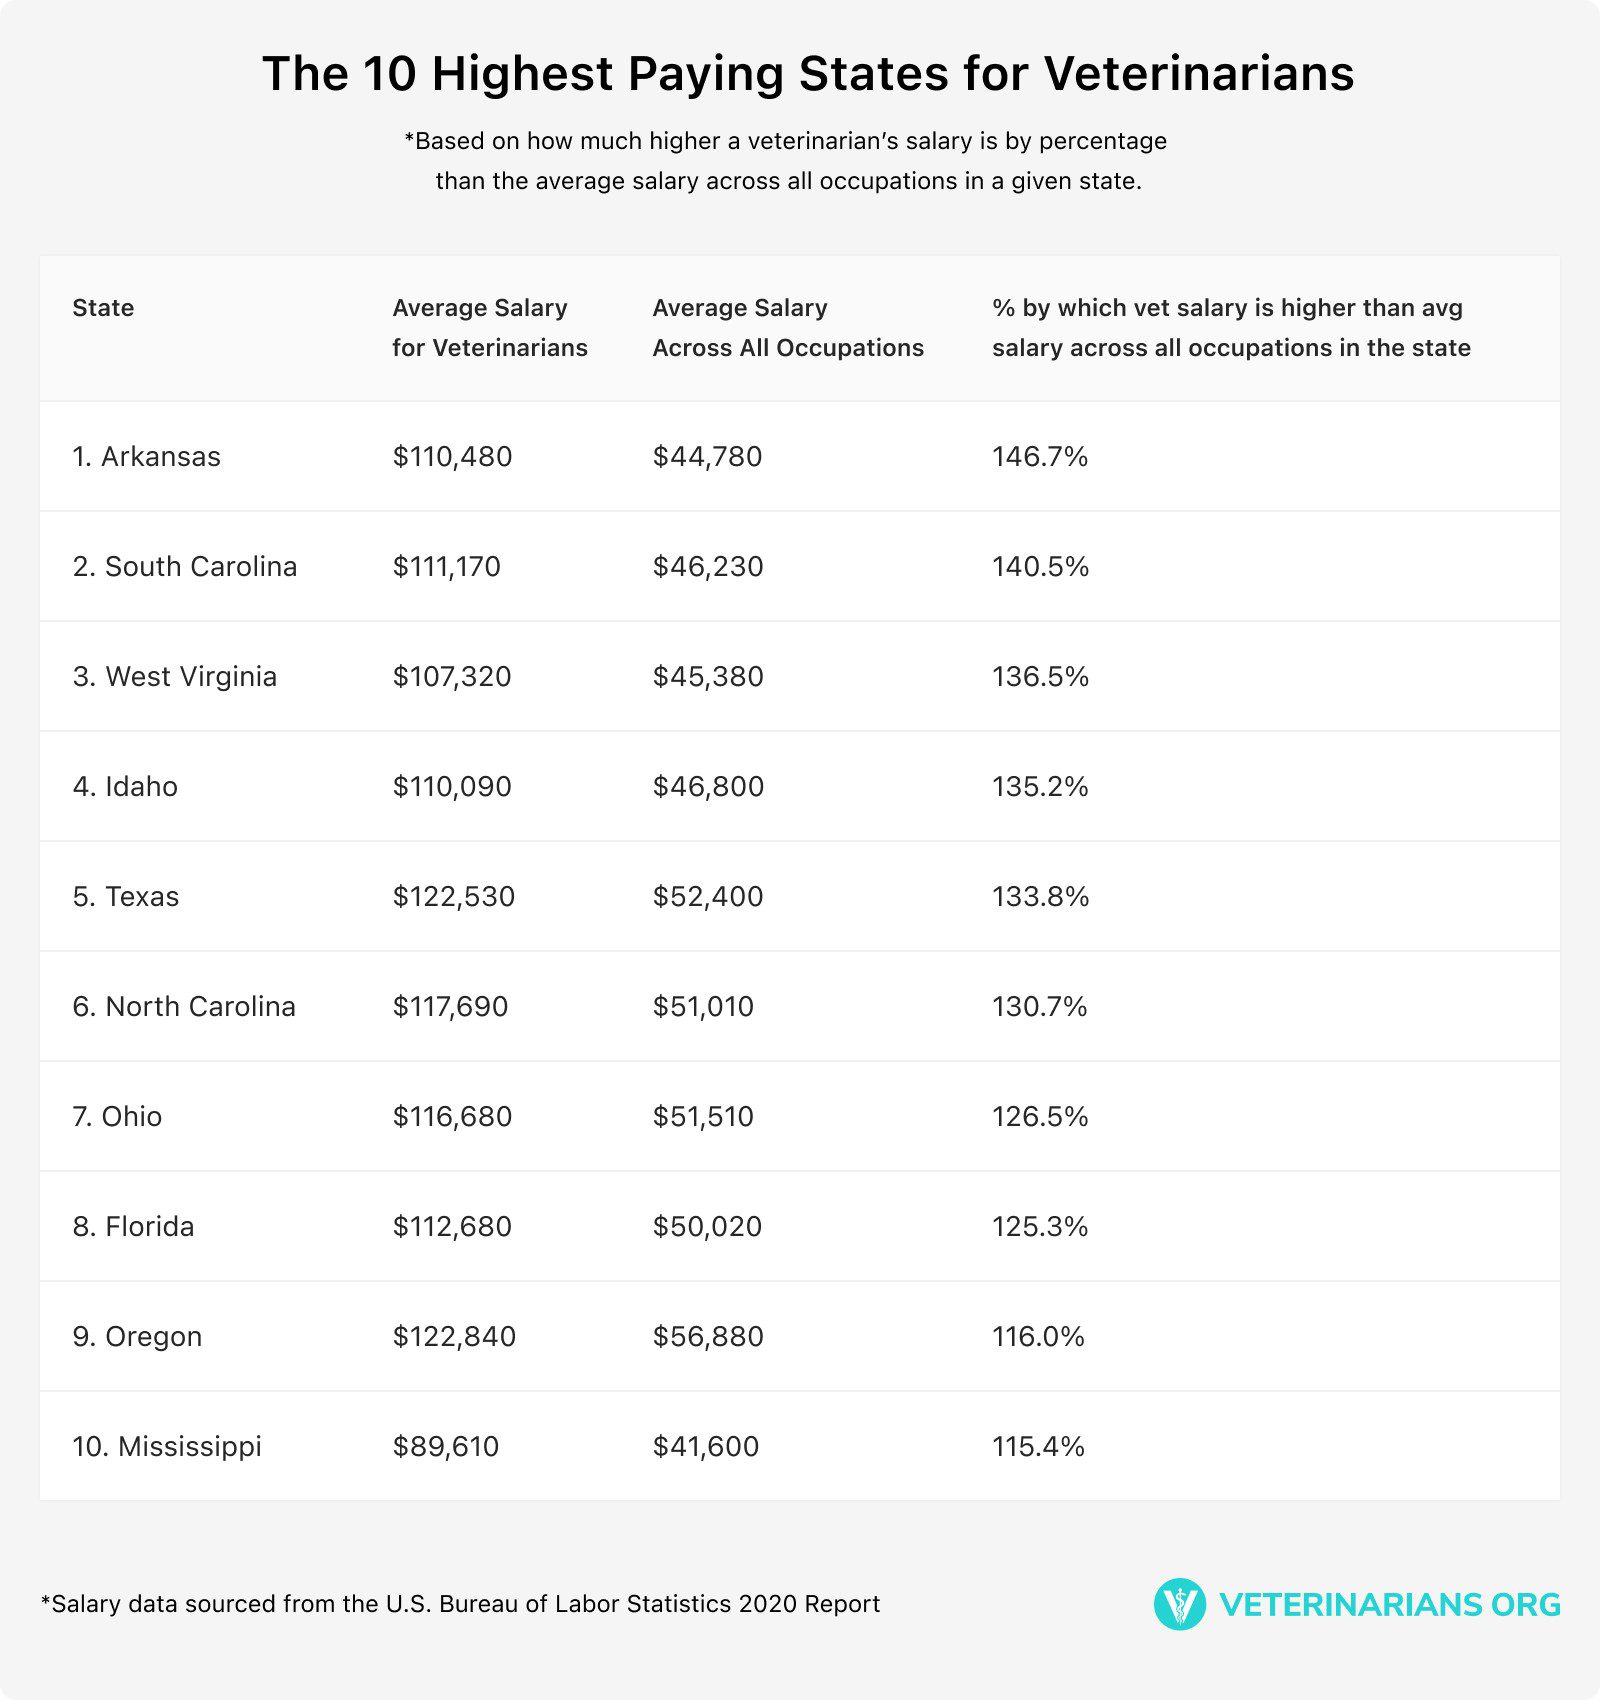 The 10 Highest Paying States for Veterinarians chart